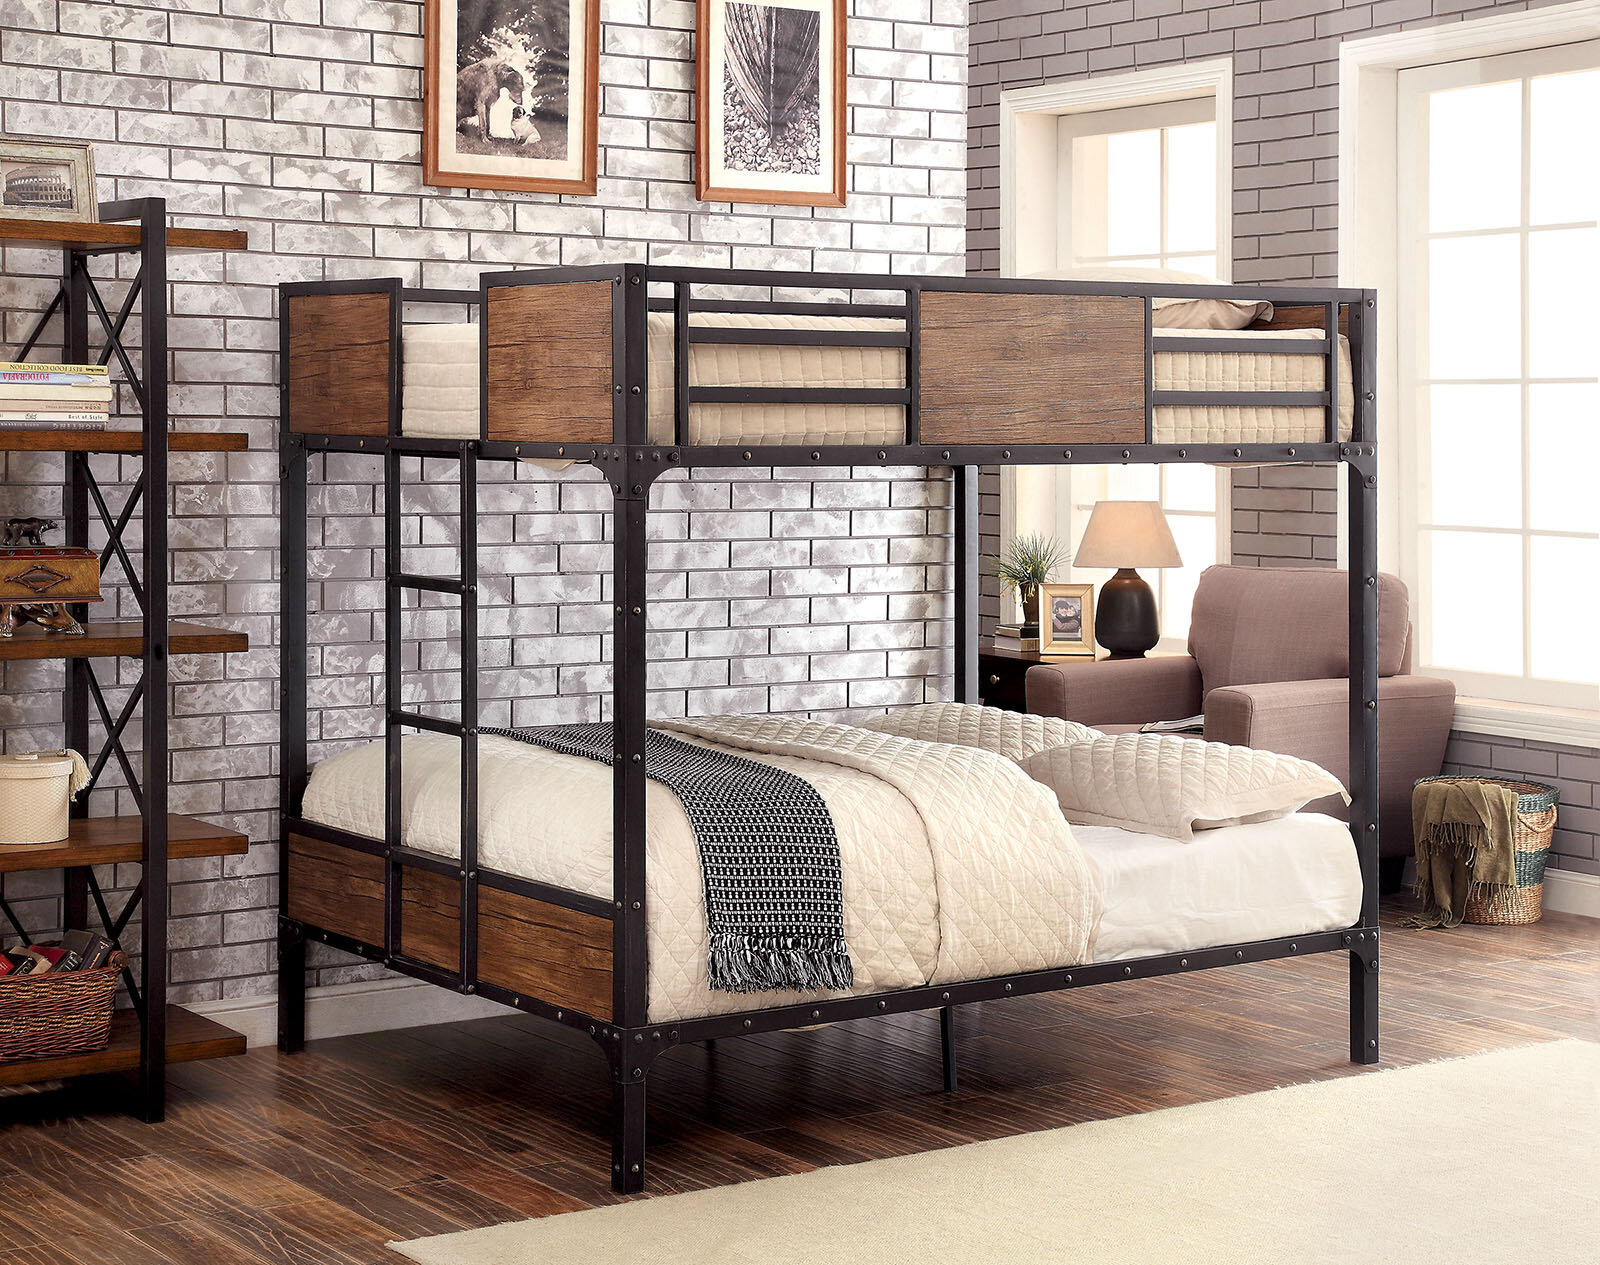 youths bedroom furniture